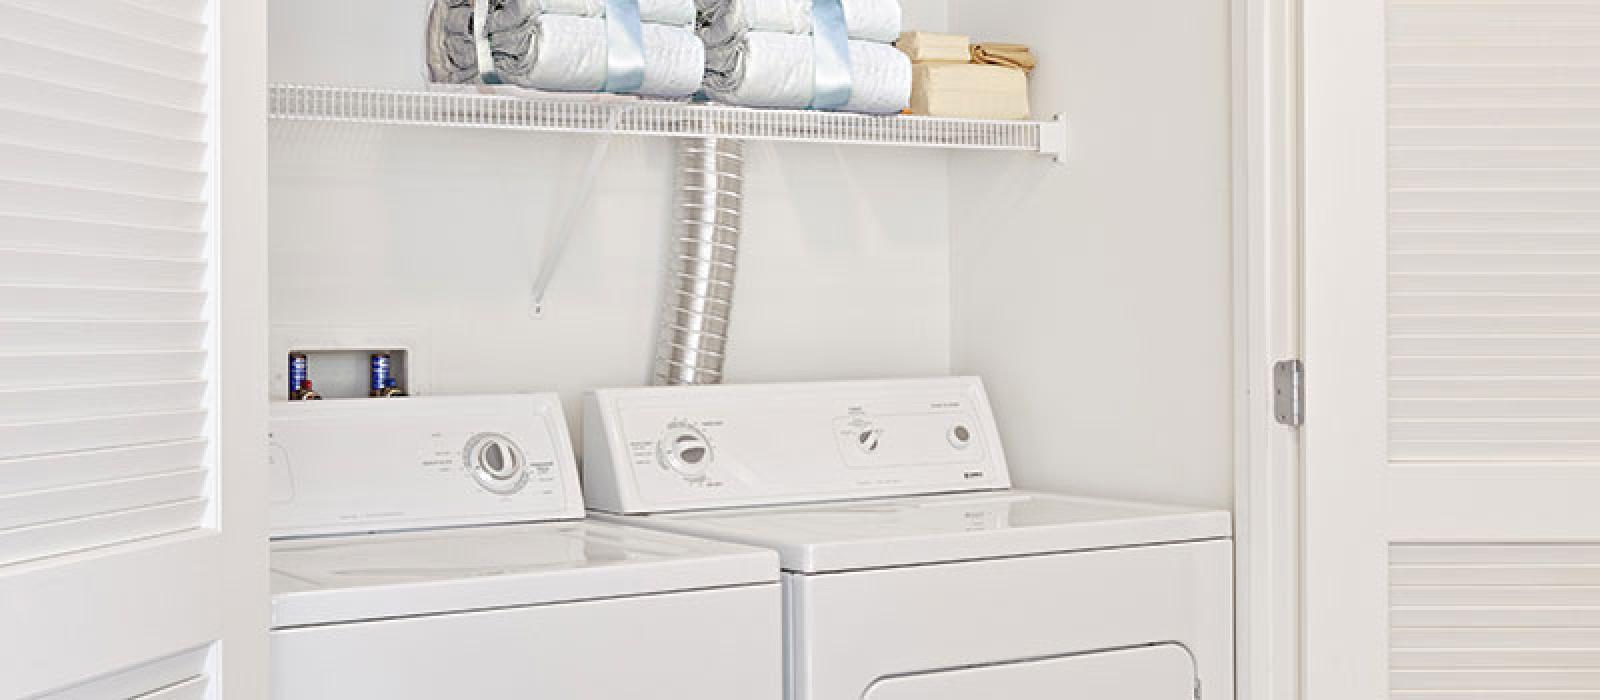 Laundry closet with washer and dryer.